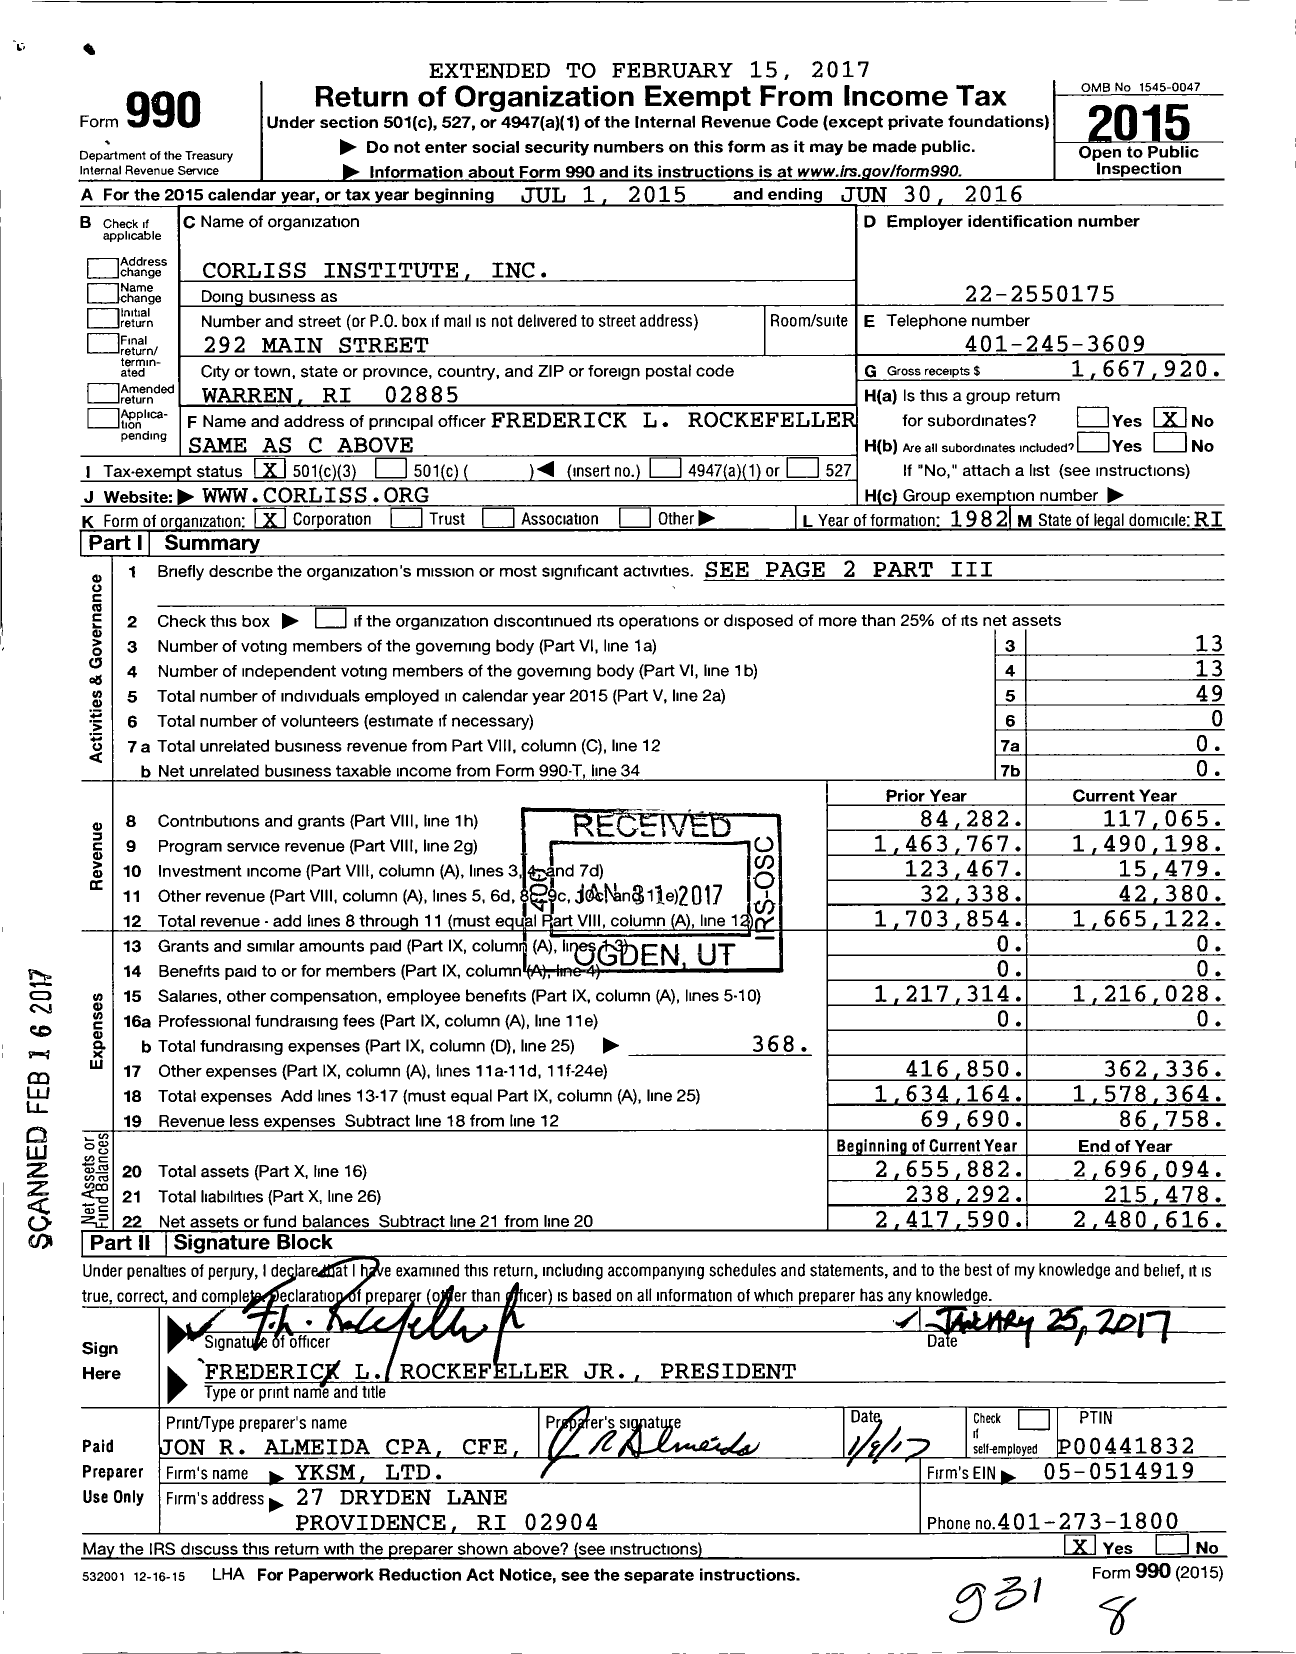 Image of first page of 2015 Form 990 for Corliss Institute